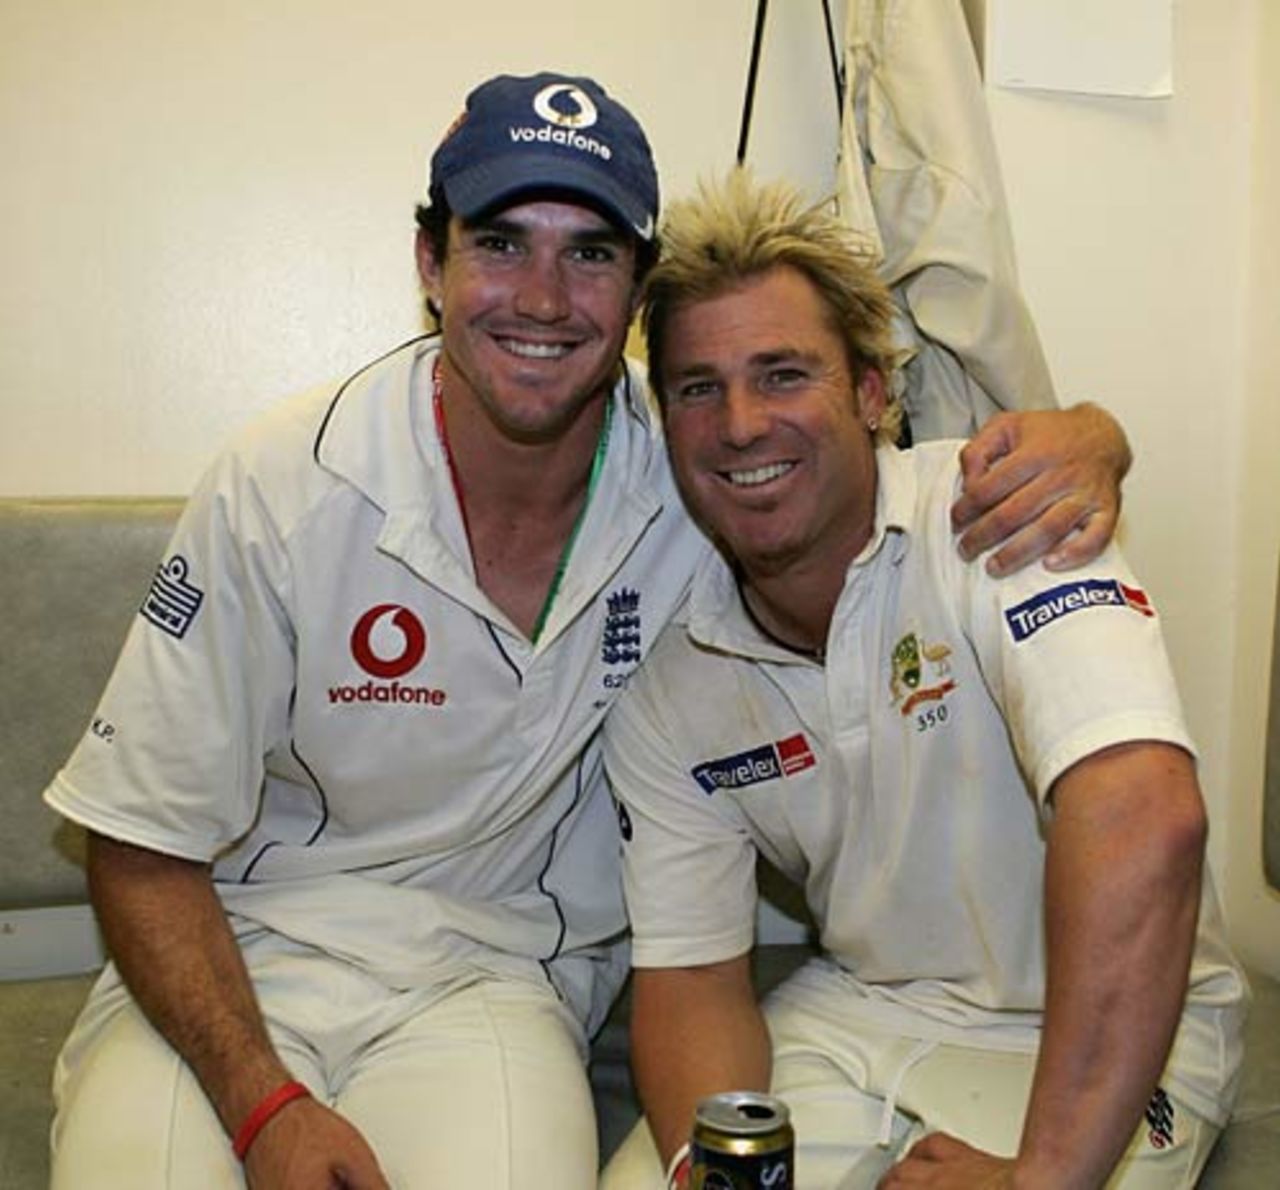 The battle is over - Kevin Pietersen and Shane Warne share a beer, England v Australia, The Oval, September 12, 2005